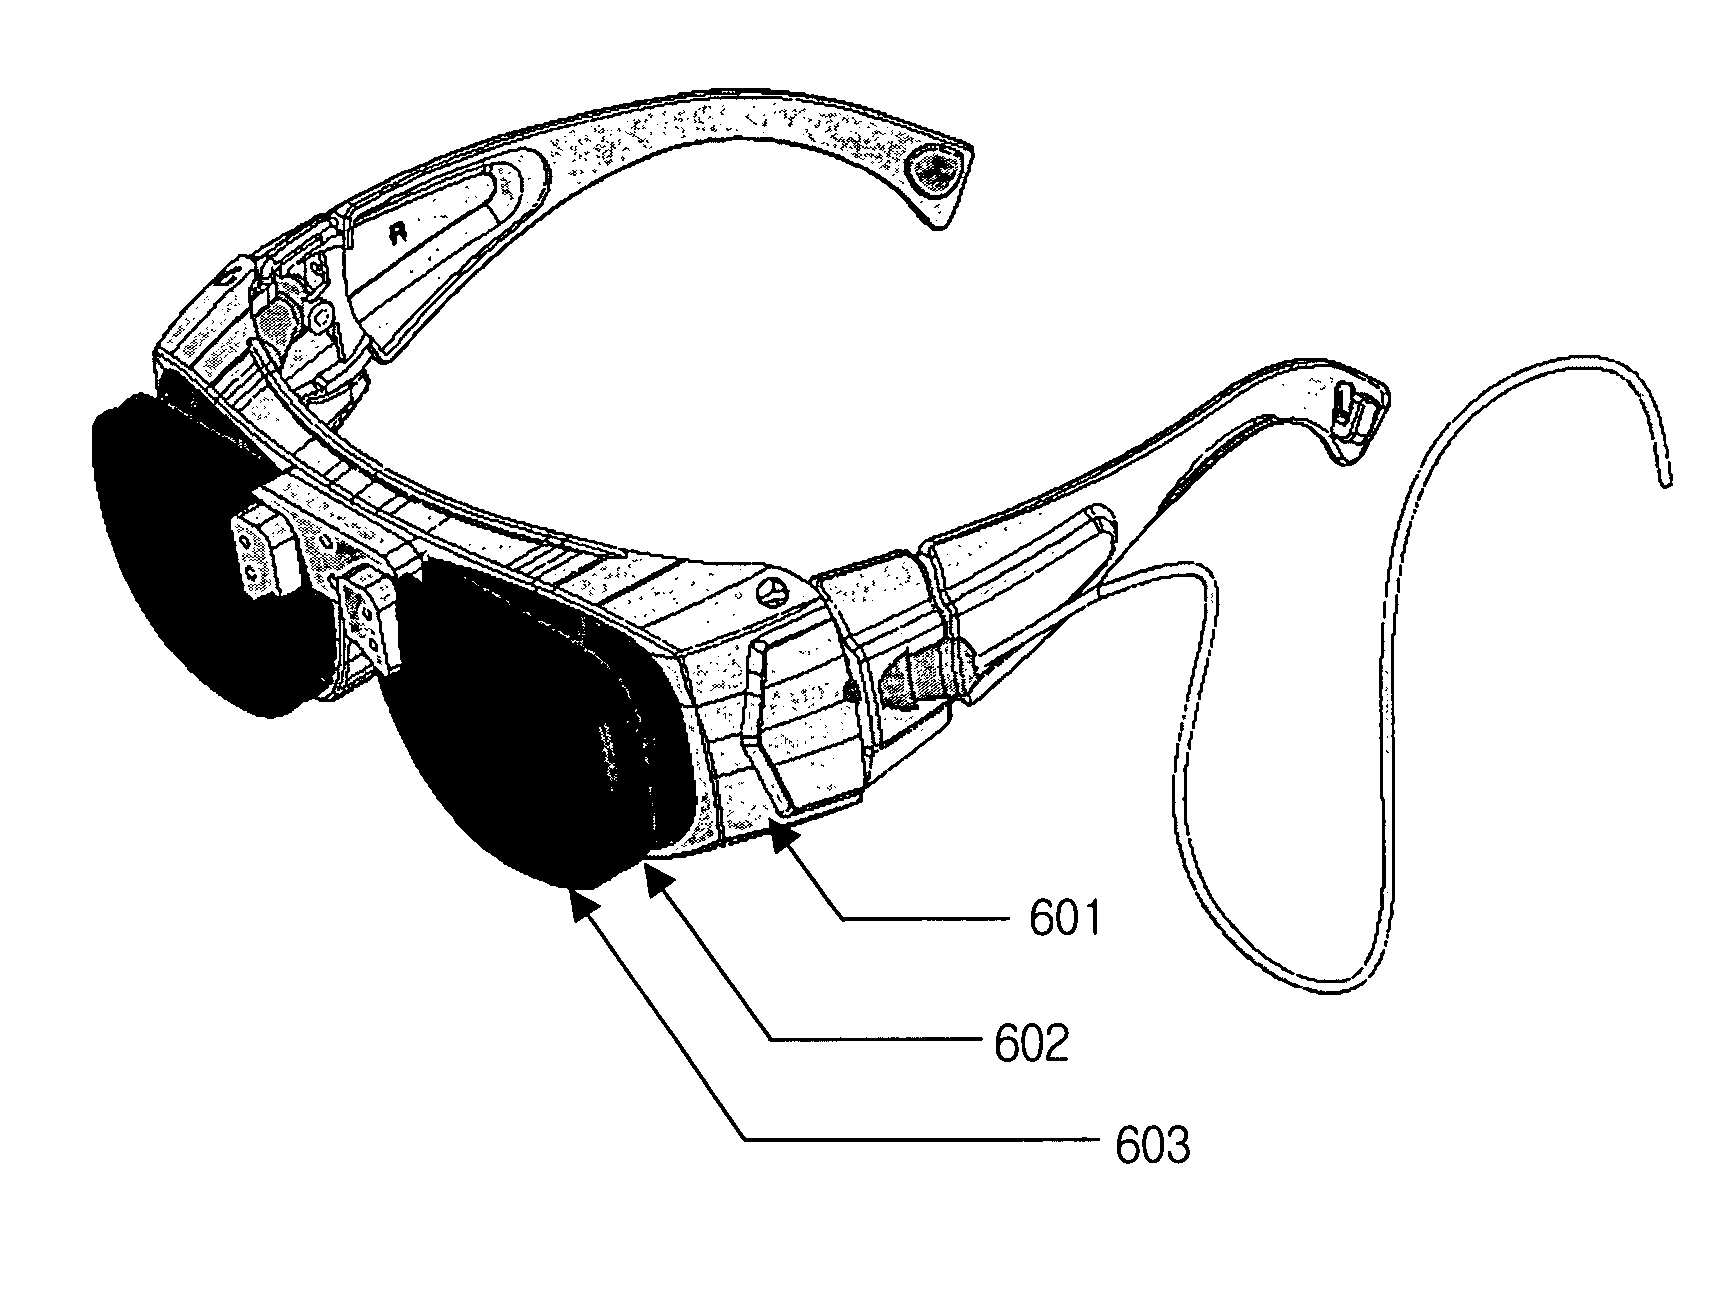 Face-mounted display apparatus for mixed reality environment